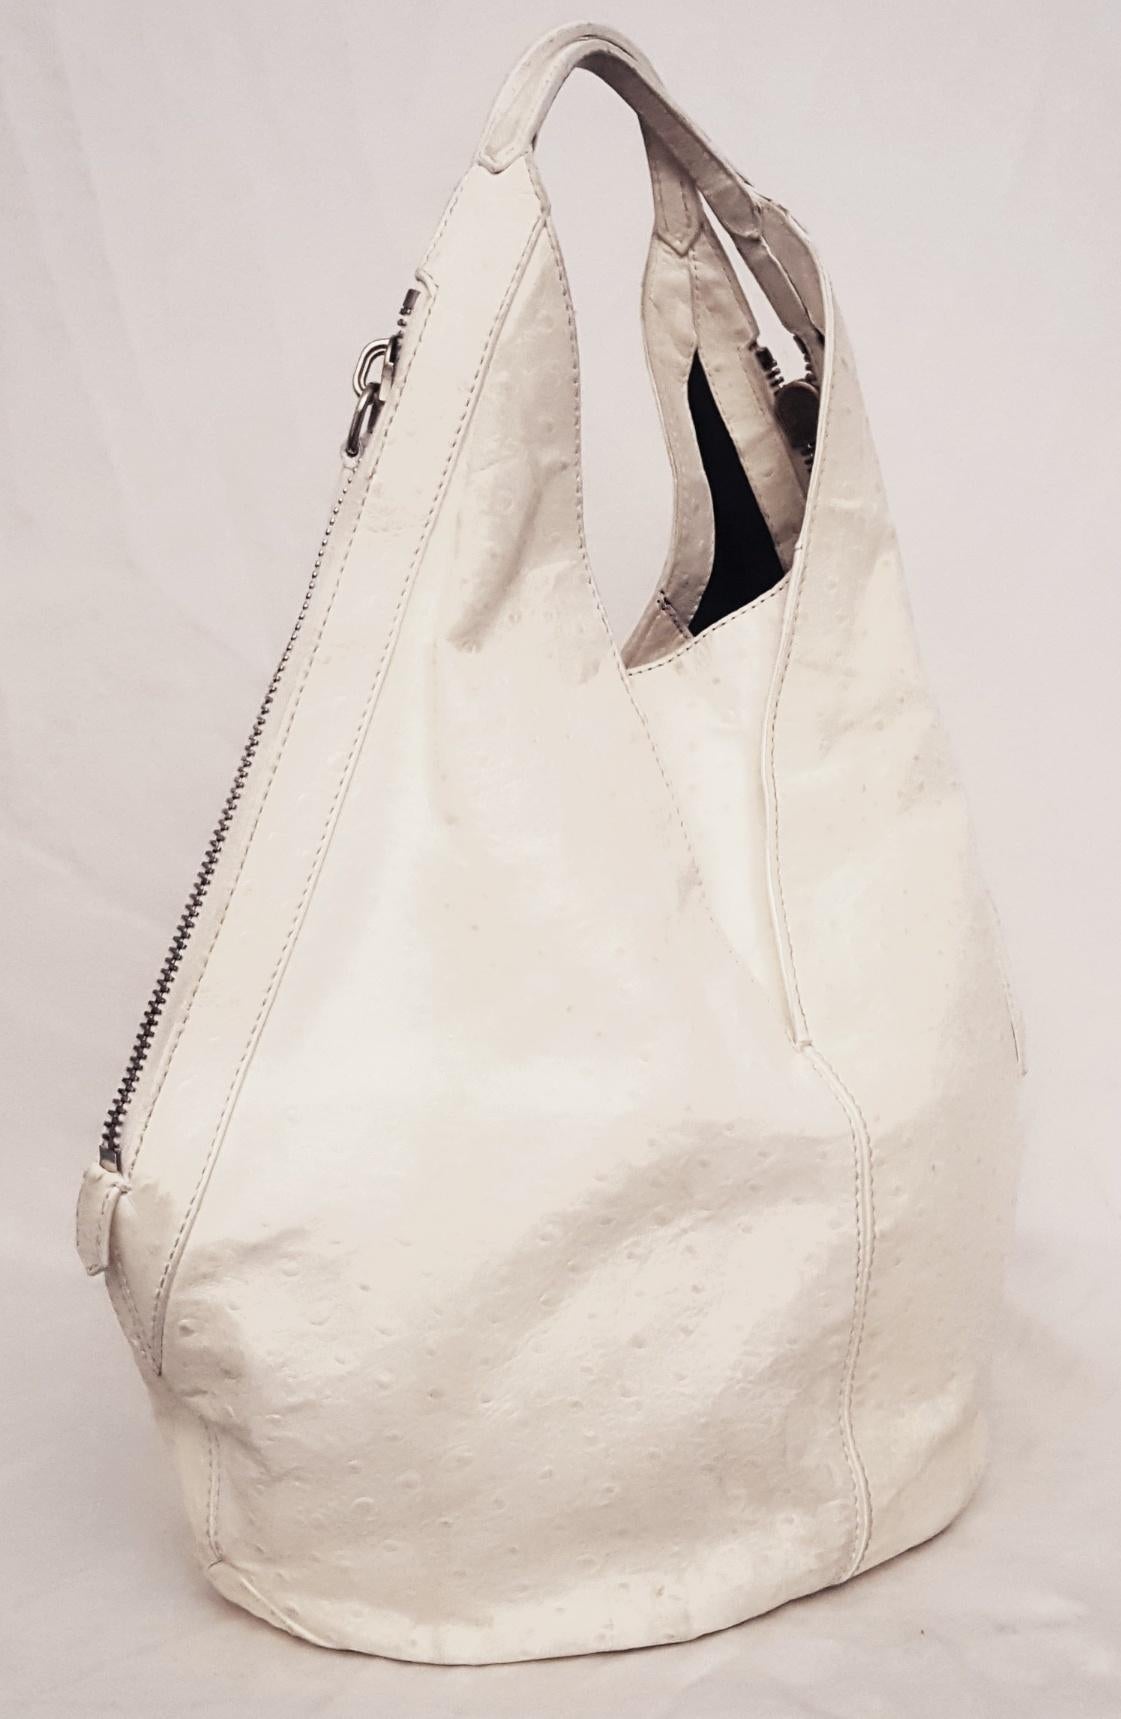 Givenchy ivory Tinhan ostrich leather Hobo bag by Riccardo Tisci  features 2 side zippers for closure.   This bag is lined in black canvas.  The interior pocket contains one zipper pocket and one slit pocket.  Made in Hungary.  Fits all of your